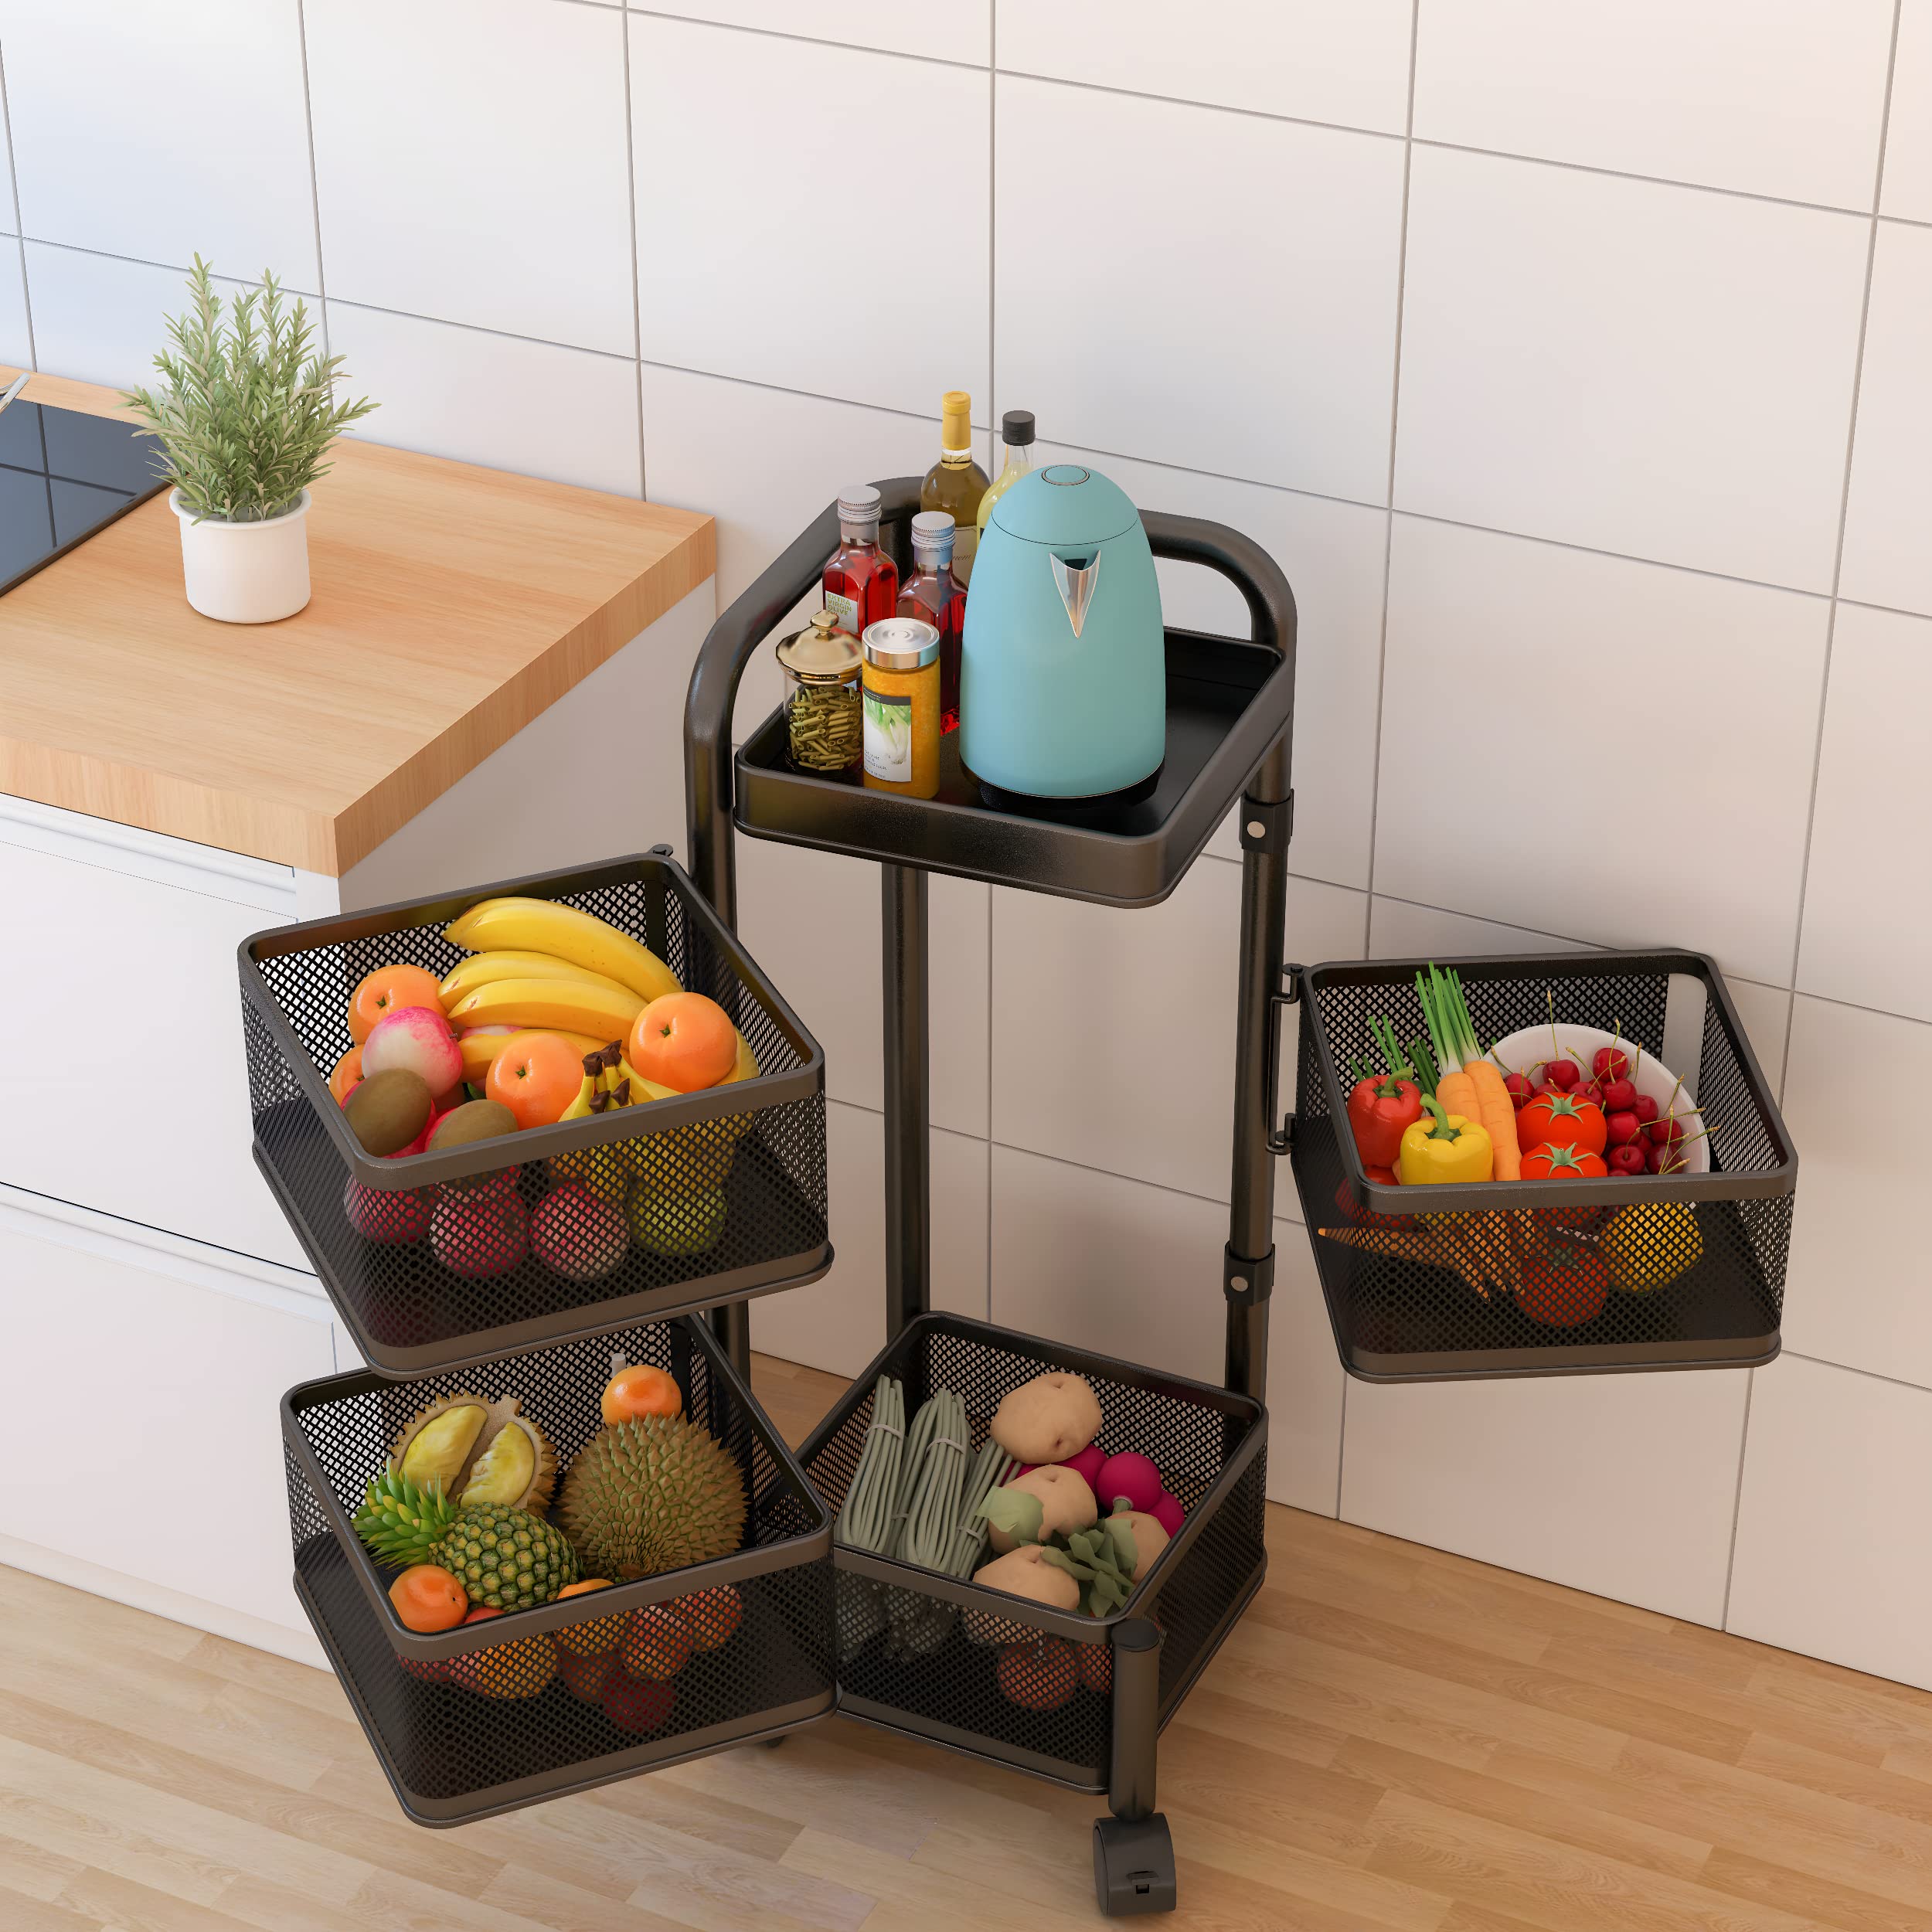 Kuber Industries 4Th Generation Square Rotating Rack|4-Layer Kitchen Trolley with 360 Rotation|Portable Storage Rack for Bathroom, Bedroom (Black)